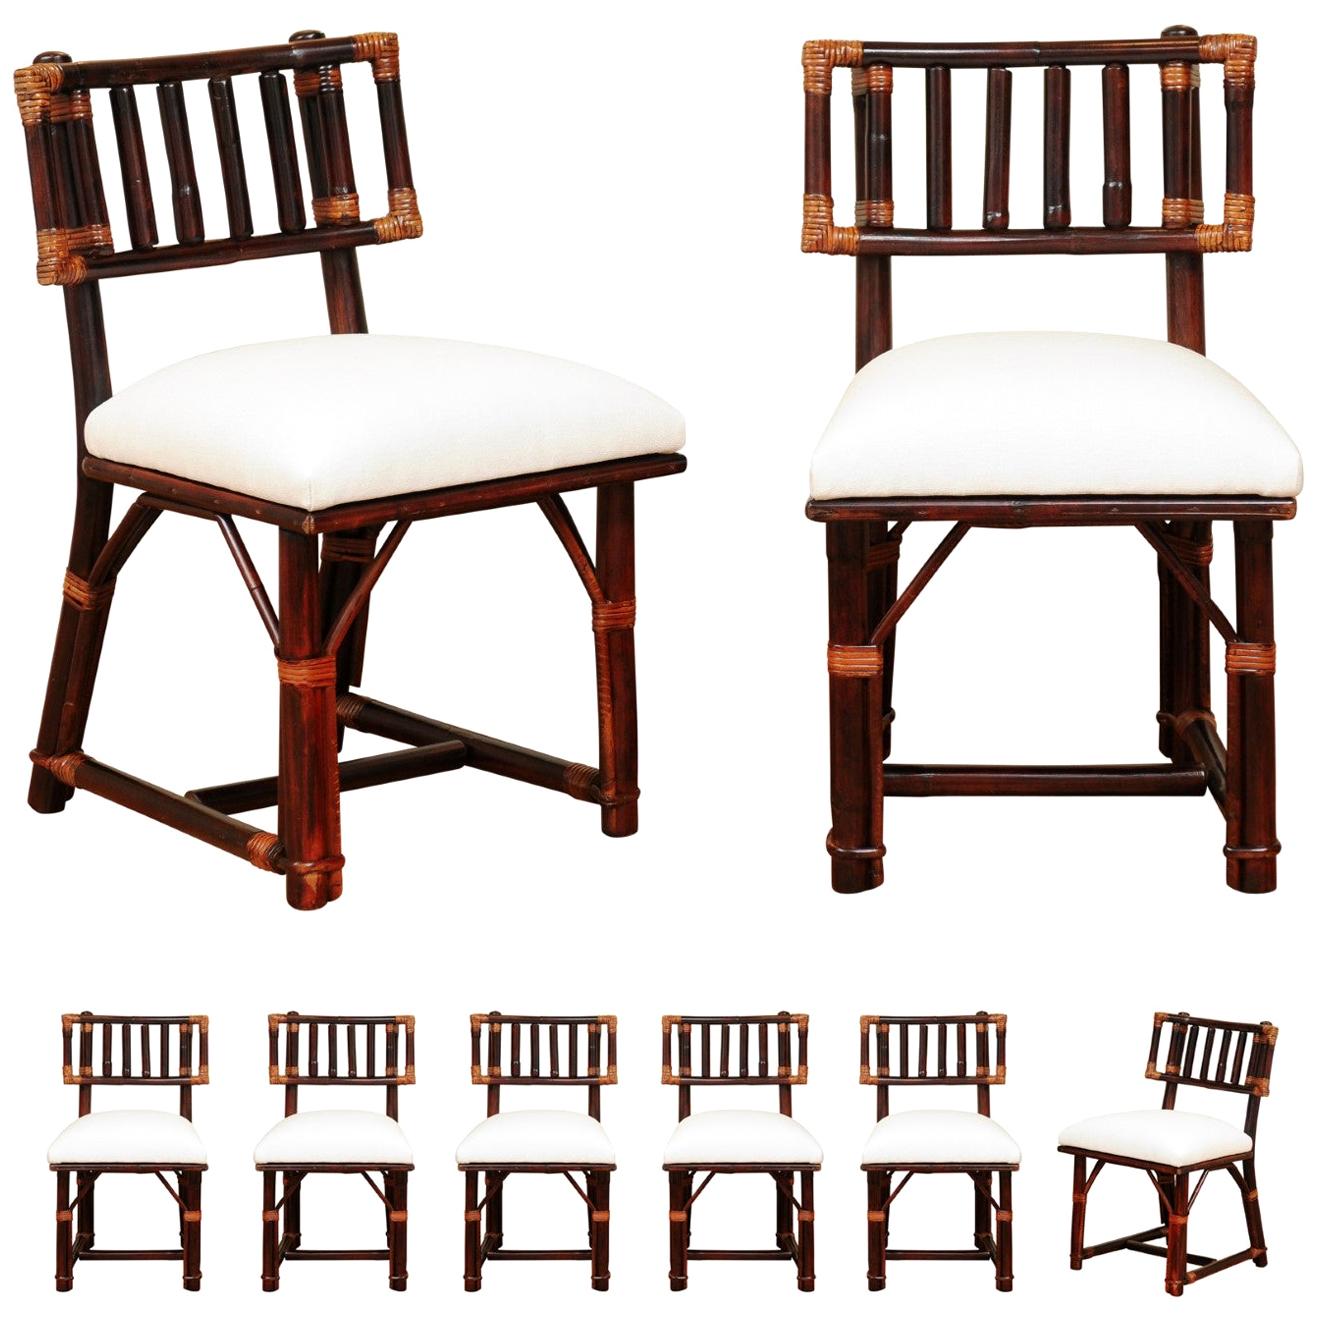 Radiant Set of 8 Rattan Chairs in Cordovan and Caramel by Wisner for Ficks Reed For Sale